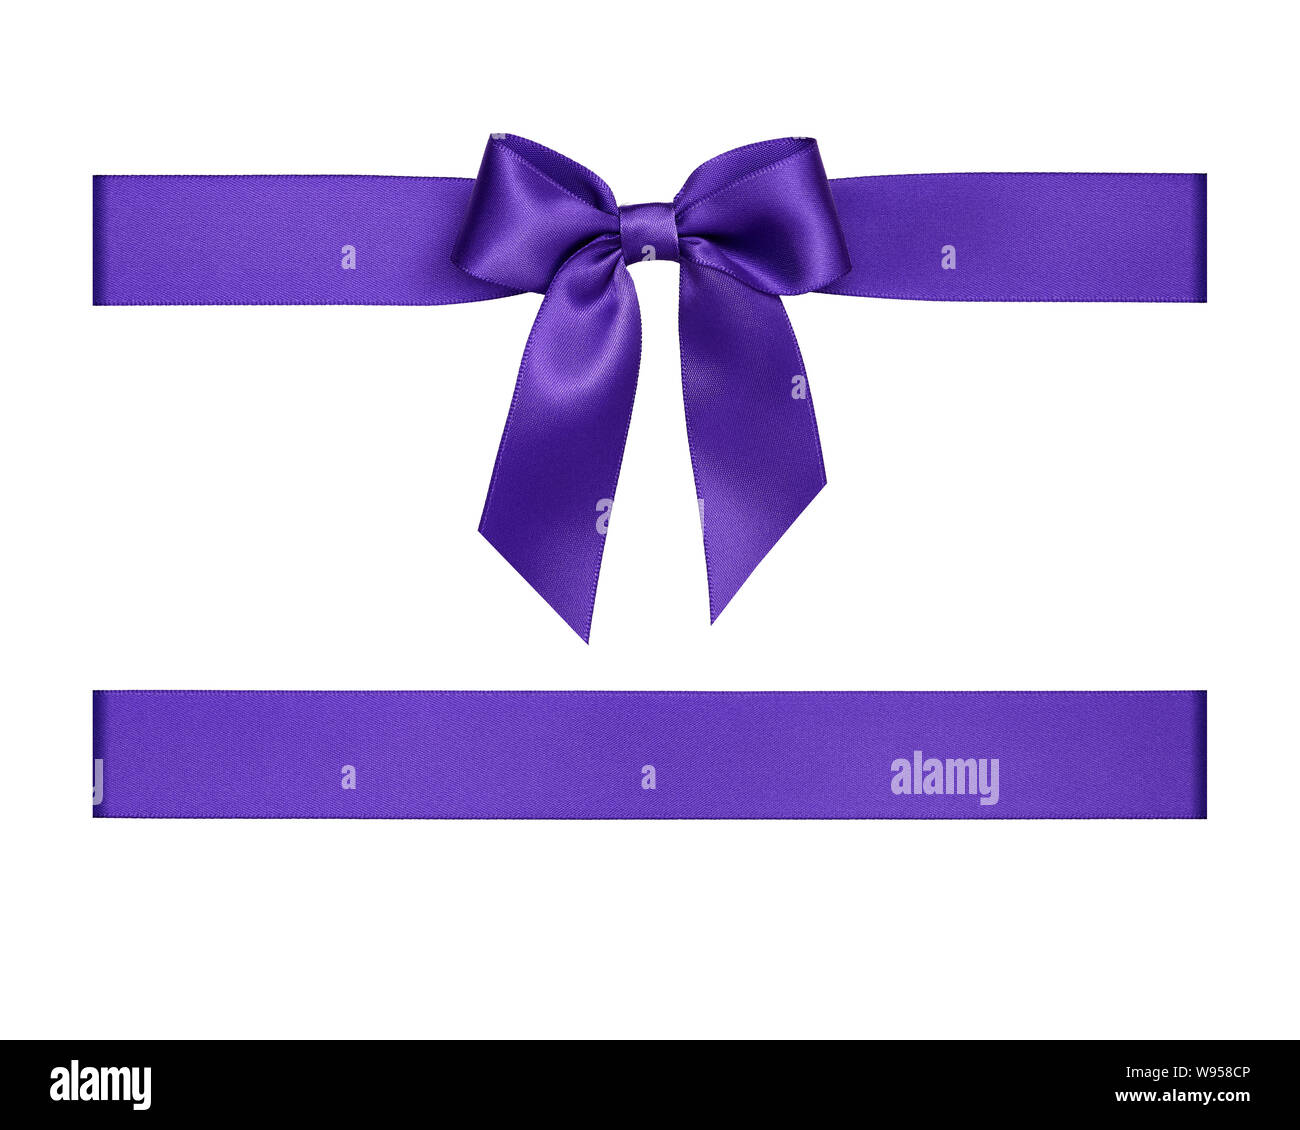 Purple ribbon bow cut out and isolated on white background, purple gift box ribbon decor Stock Photo